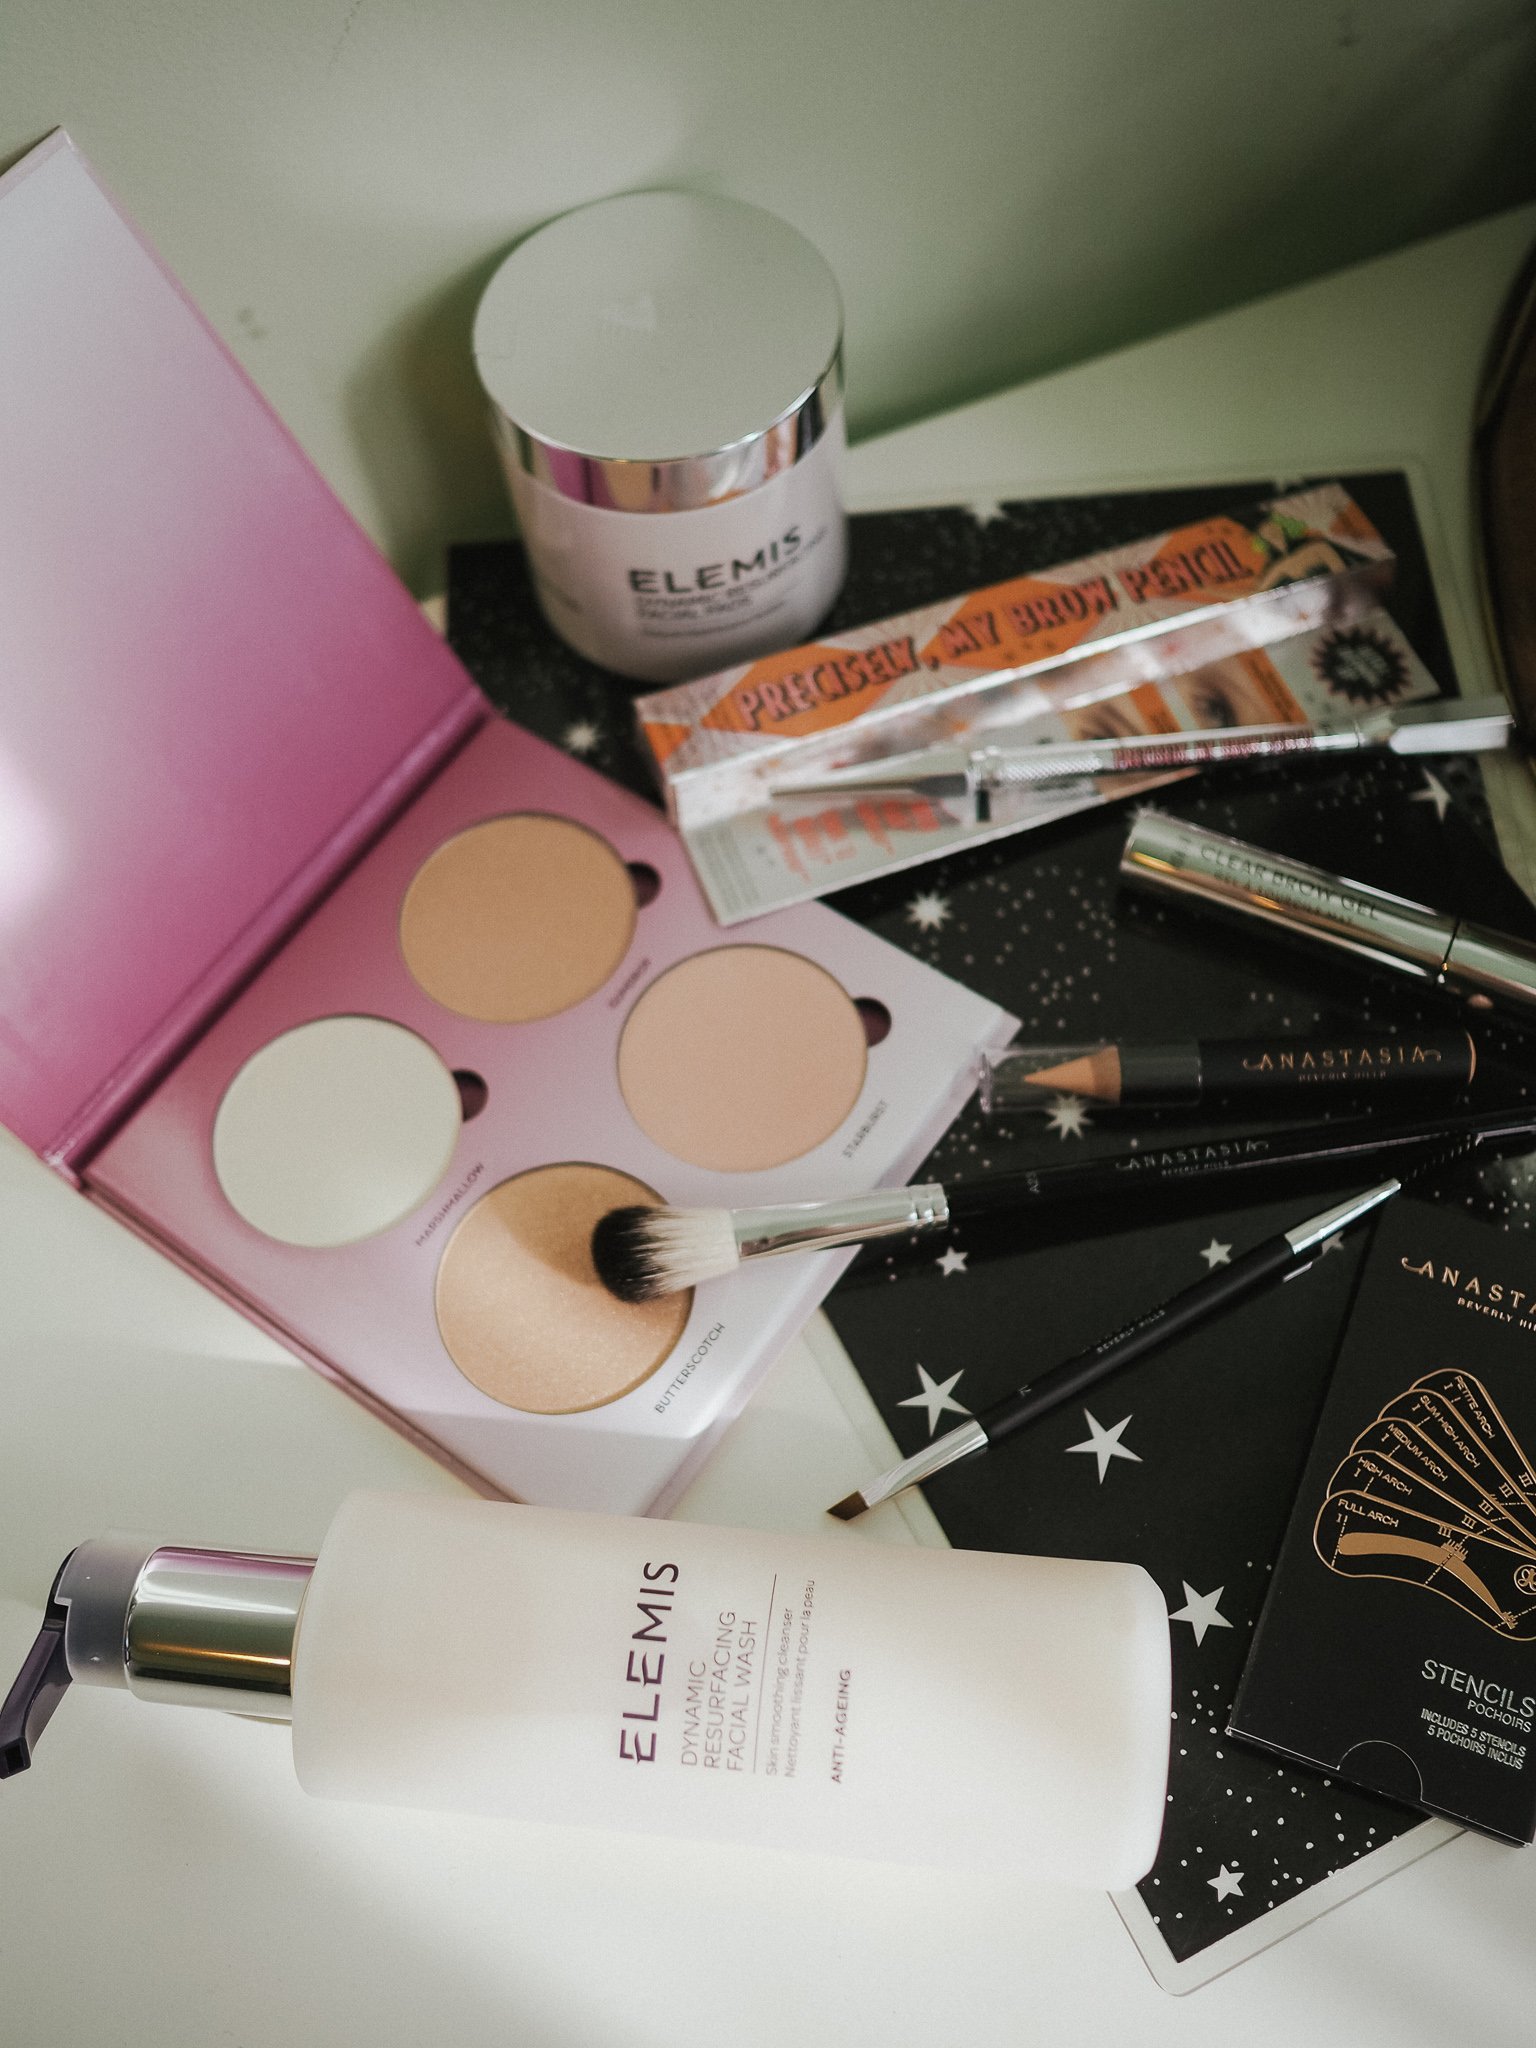 Lifestyle blogger Kelsey from Blondes & Bagels dishes out the best QVC and HSN beauty sales online right now! Find sales on all the best beauty brands.